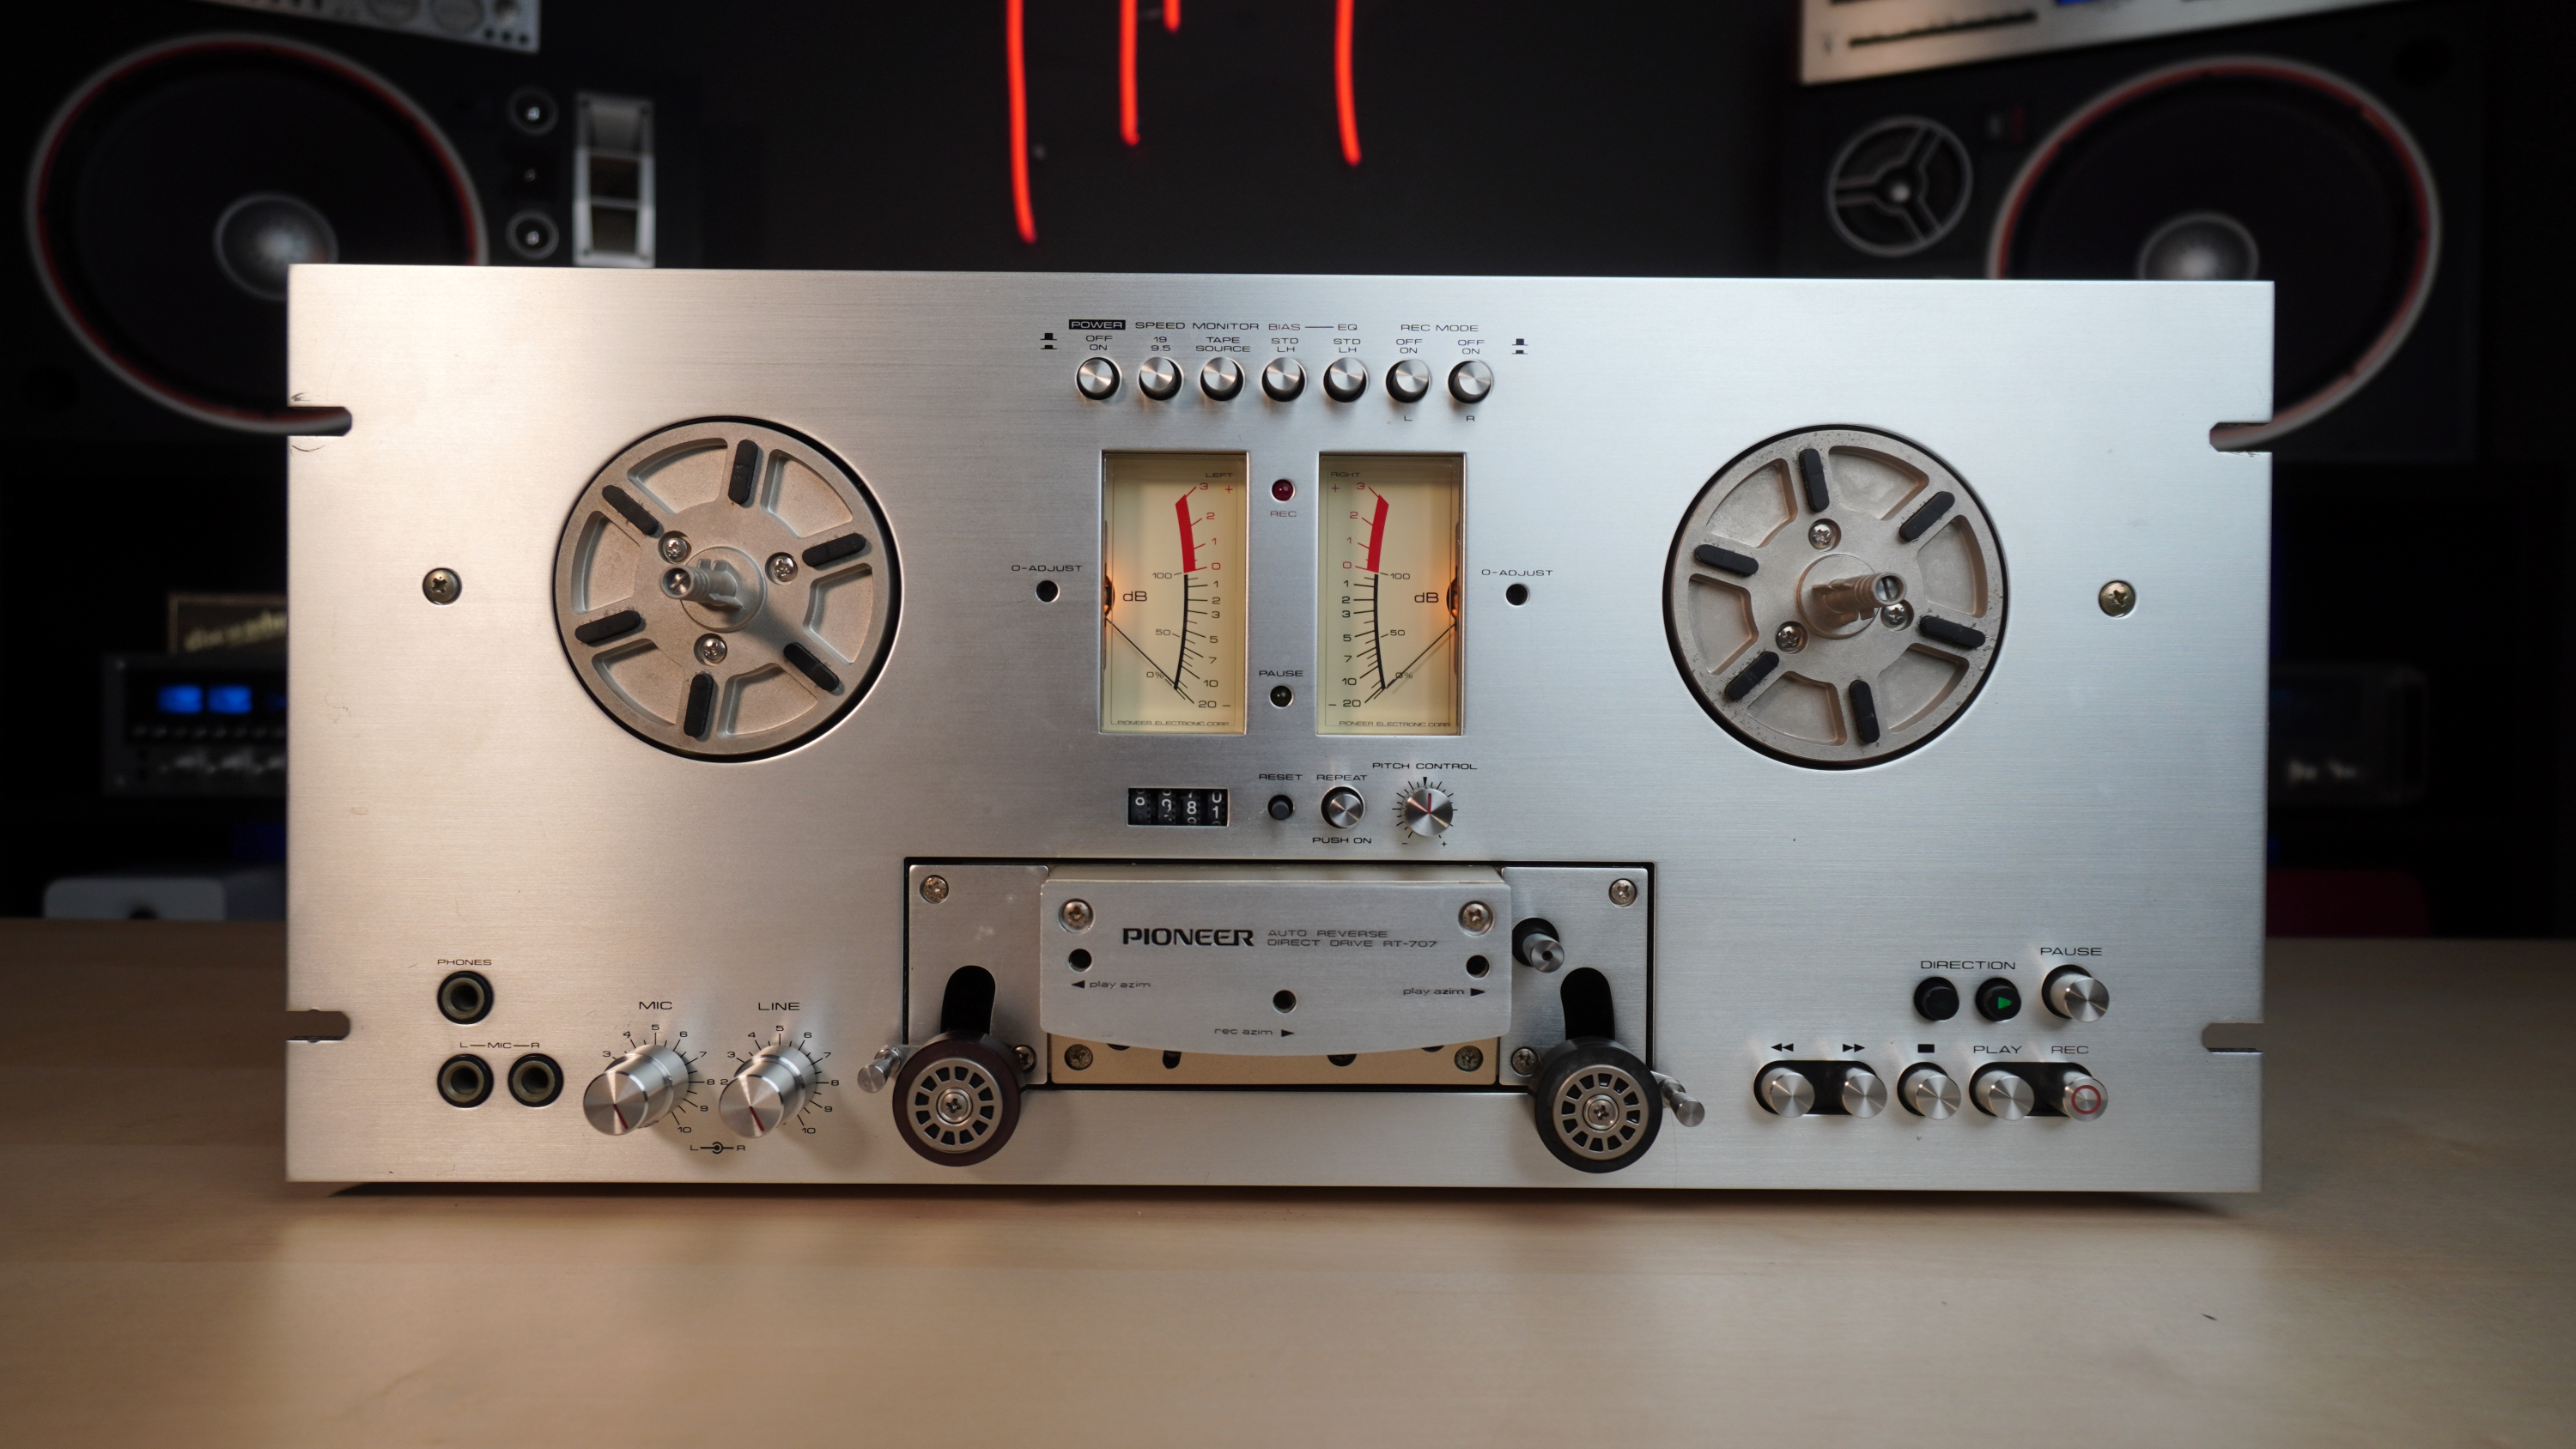 RT-707 4-Track Stereo Reel-to-Reel Tape Deck